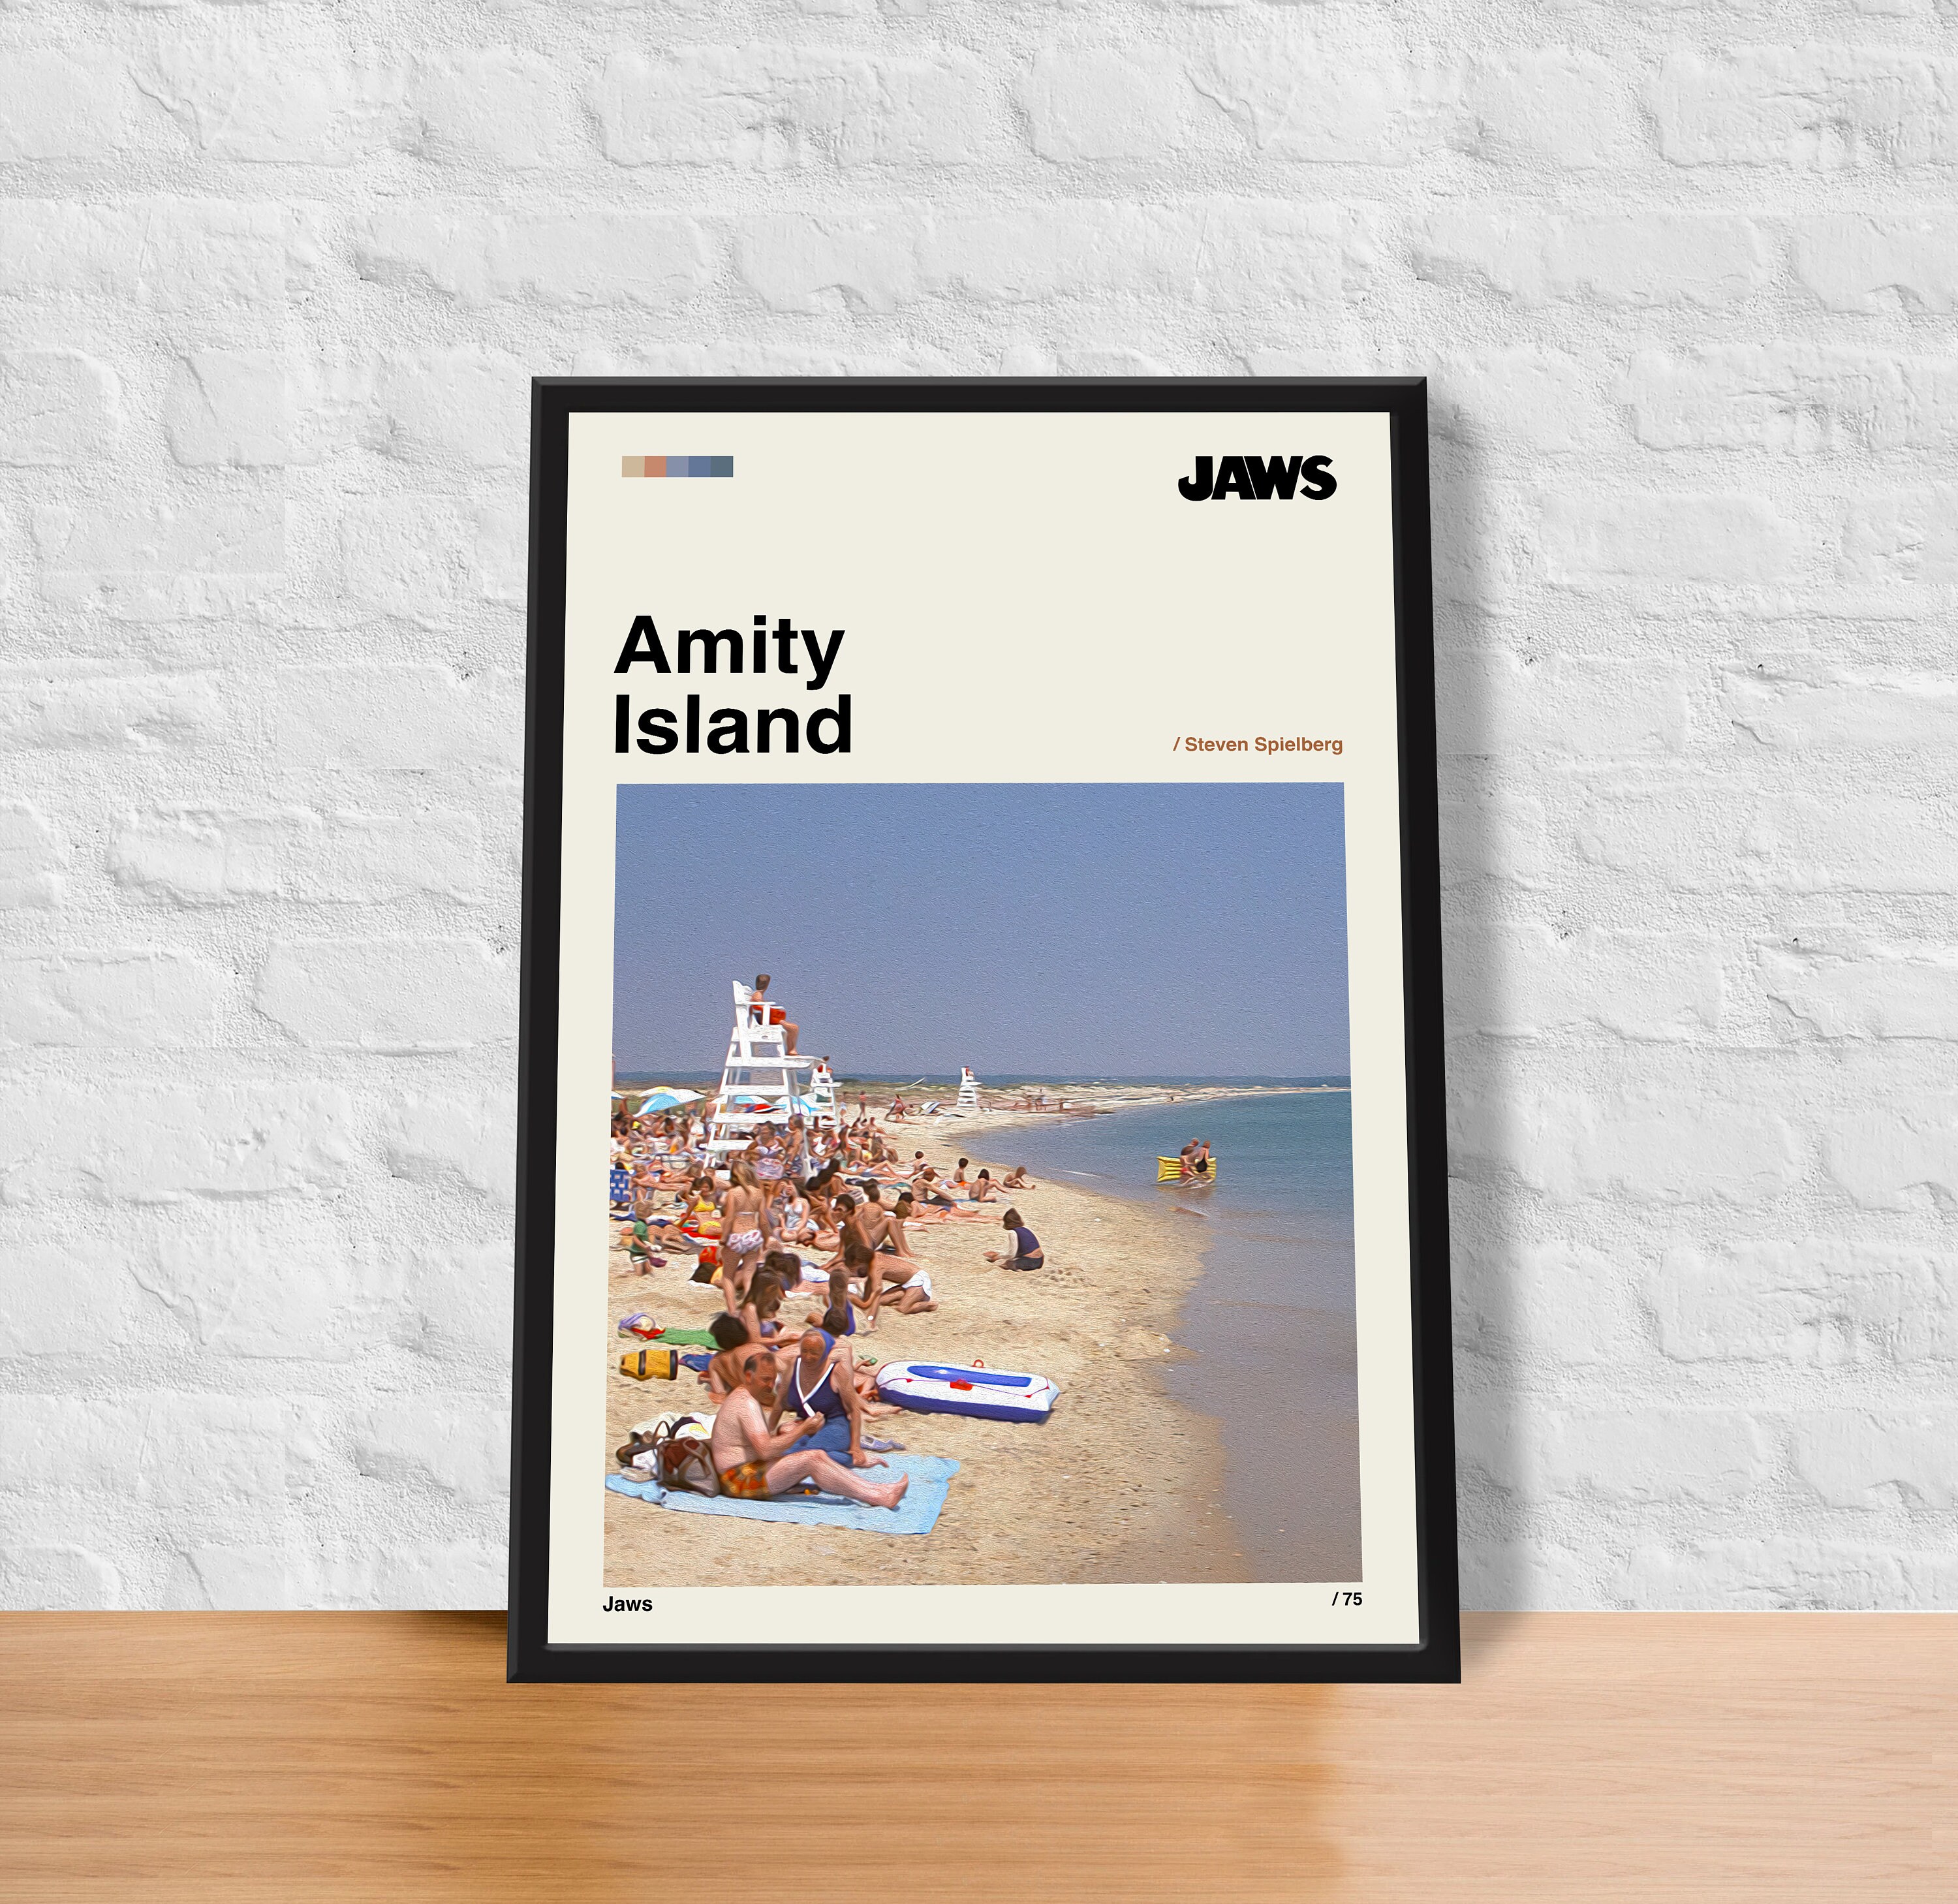 Amity Island Poster, Jaws Movie Poster, Minimalist Poster, Digital Oil Paint Style, Classic Movie Poster, Home Decor, Wall Decor, Gifts Art